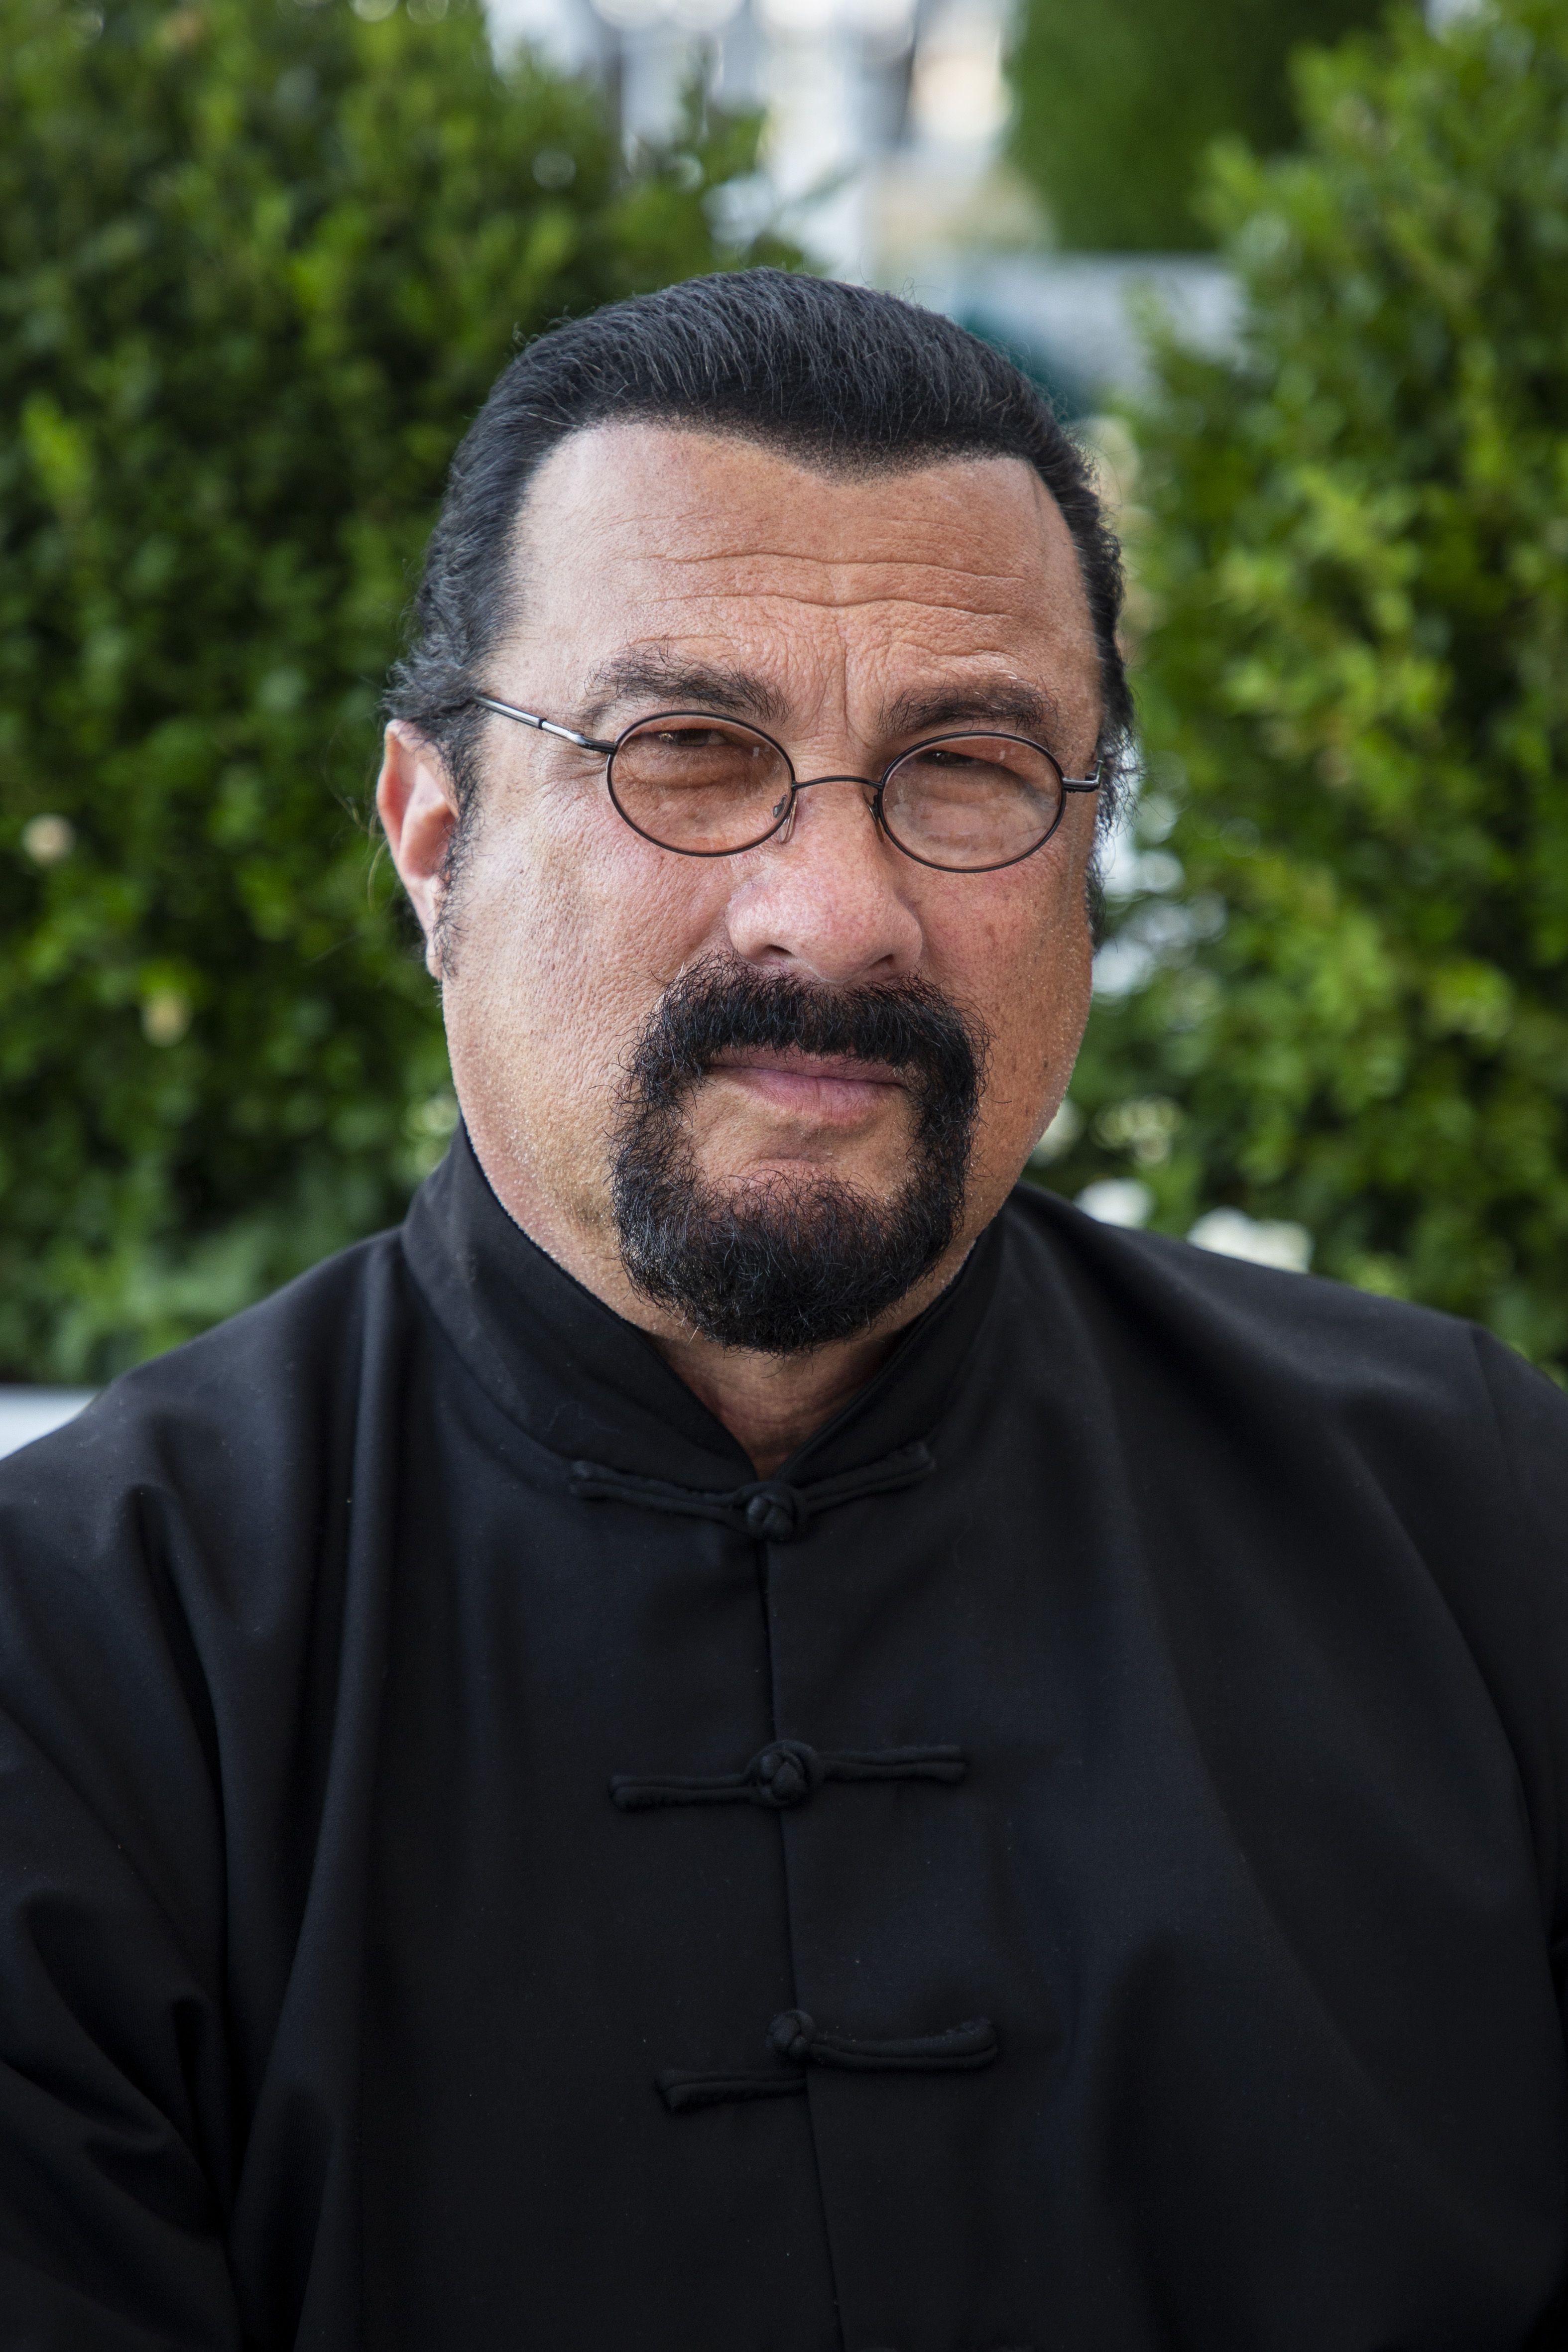 Where Is Actor Steven Seagal Now?